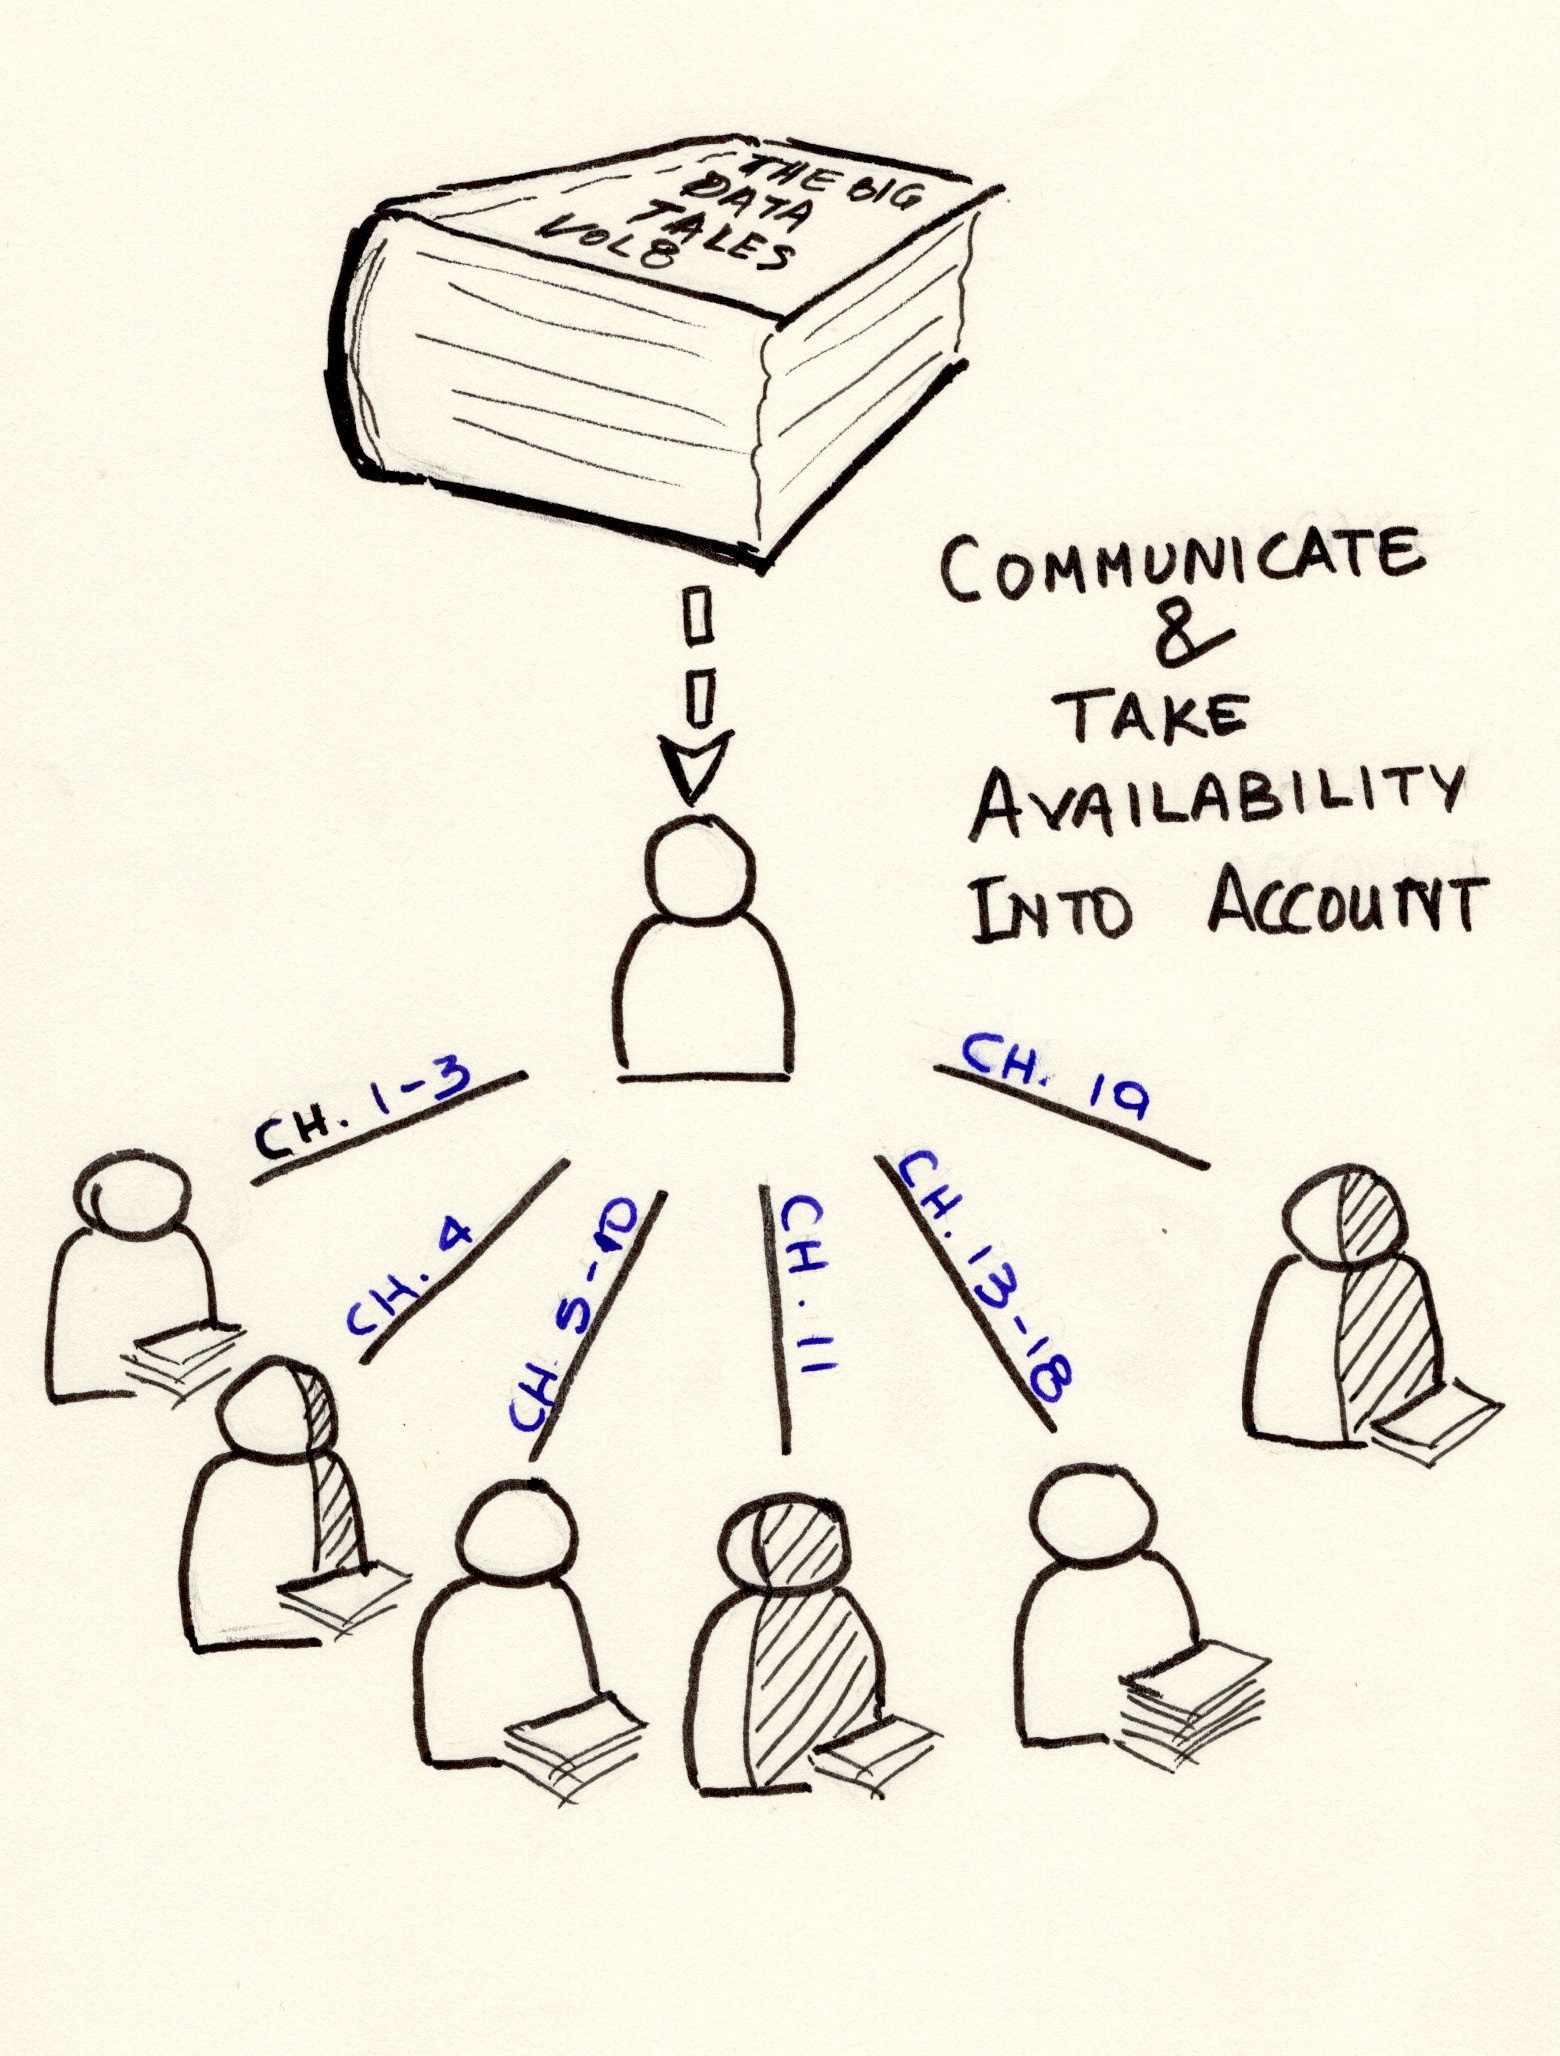 Communicate with each other, know the availability and distribute work accordingly